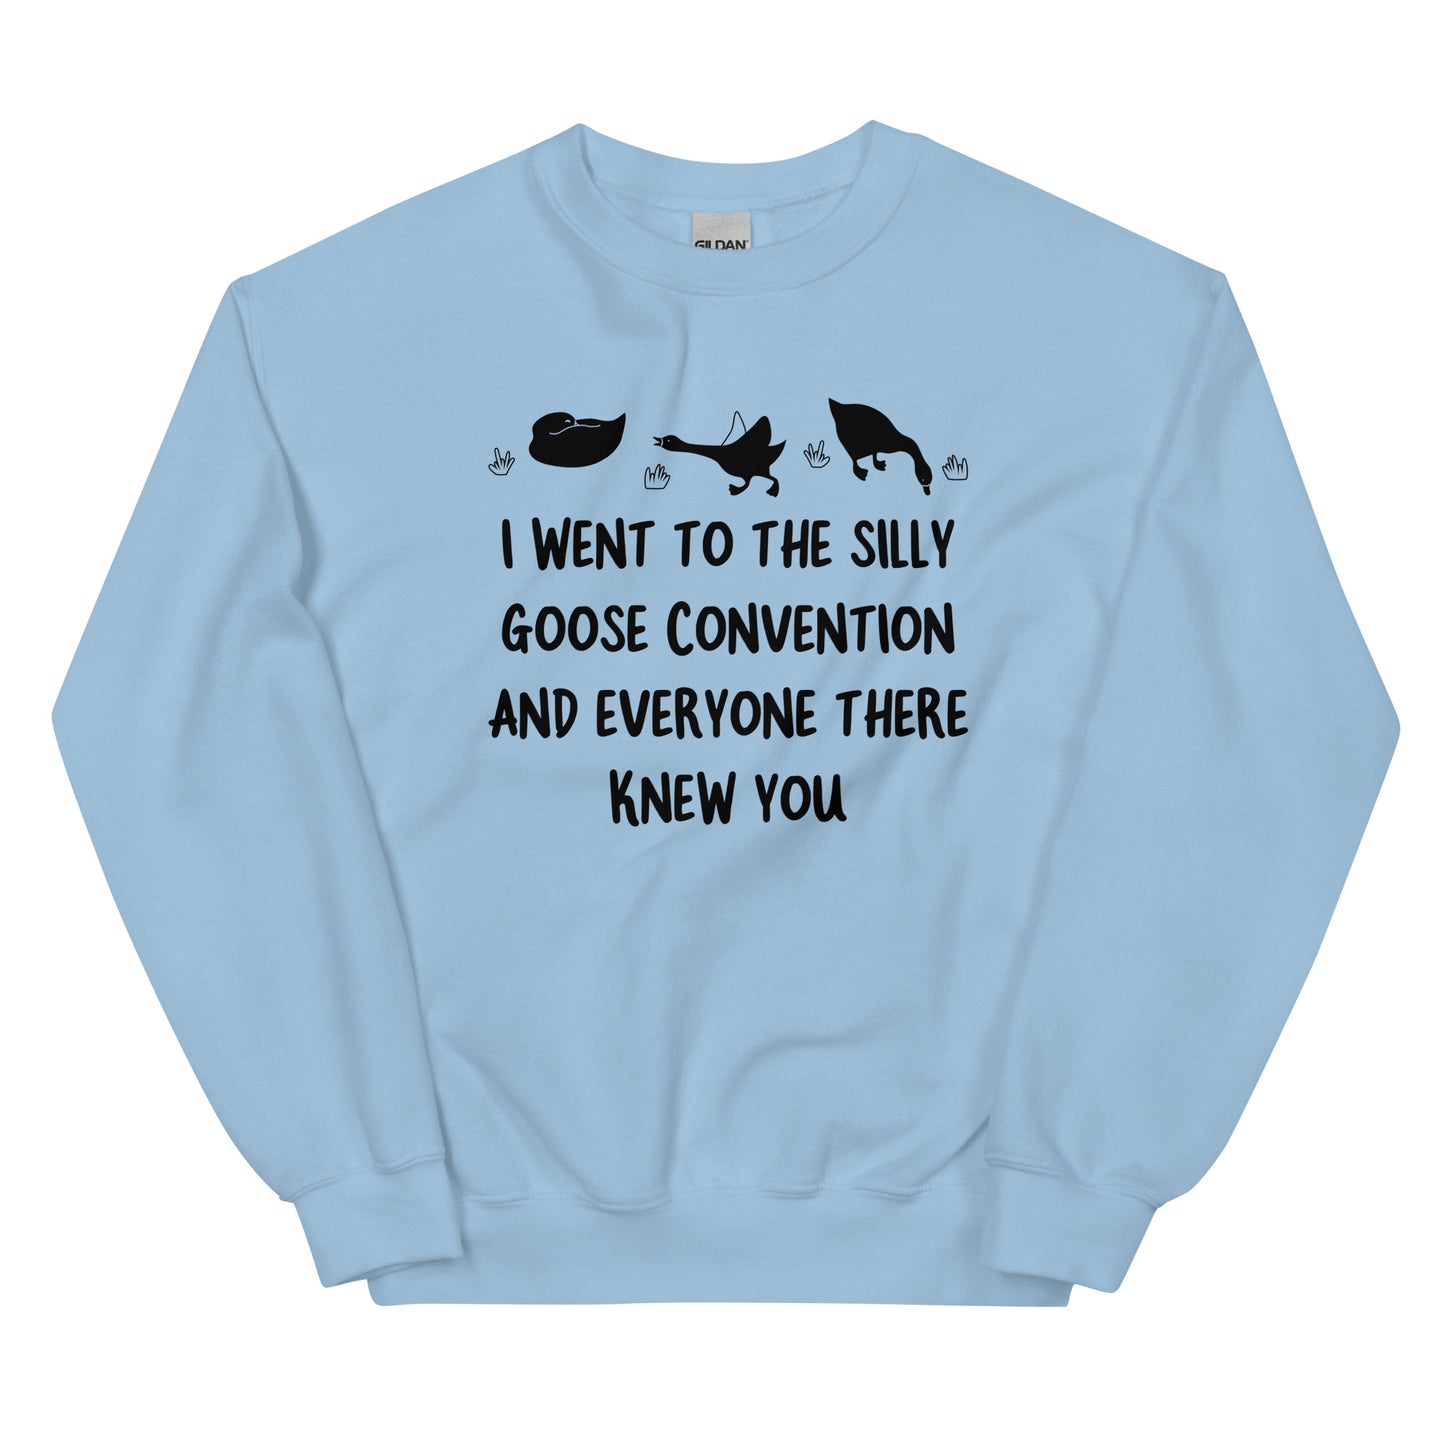 The Silly Goose Convention Unisex Sweatshirt